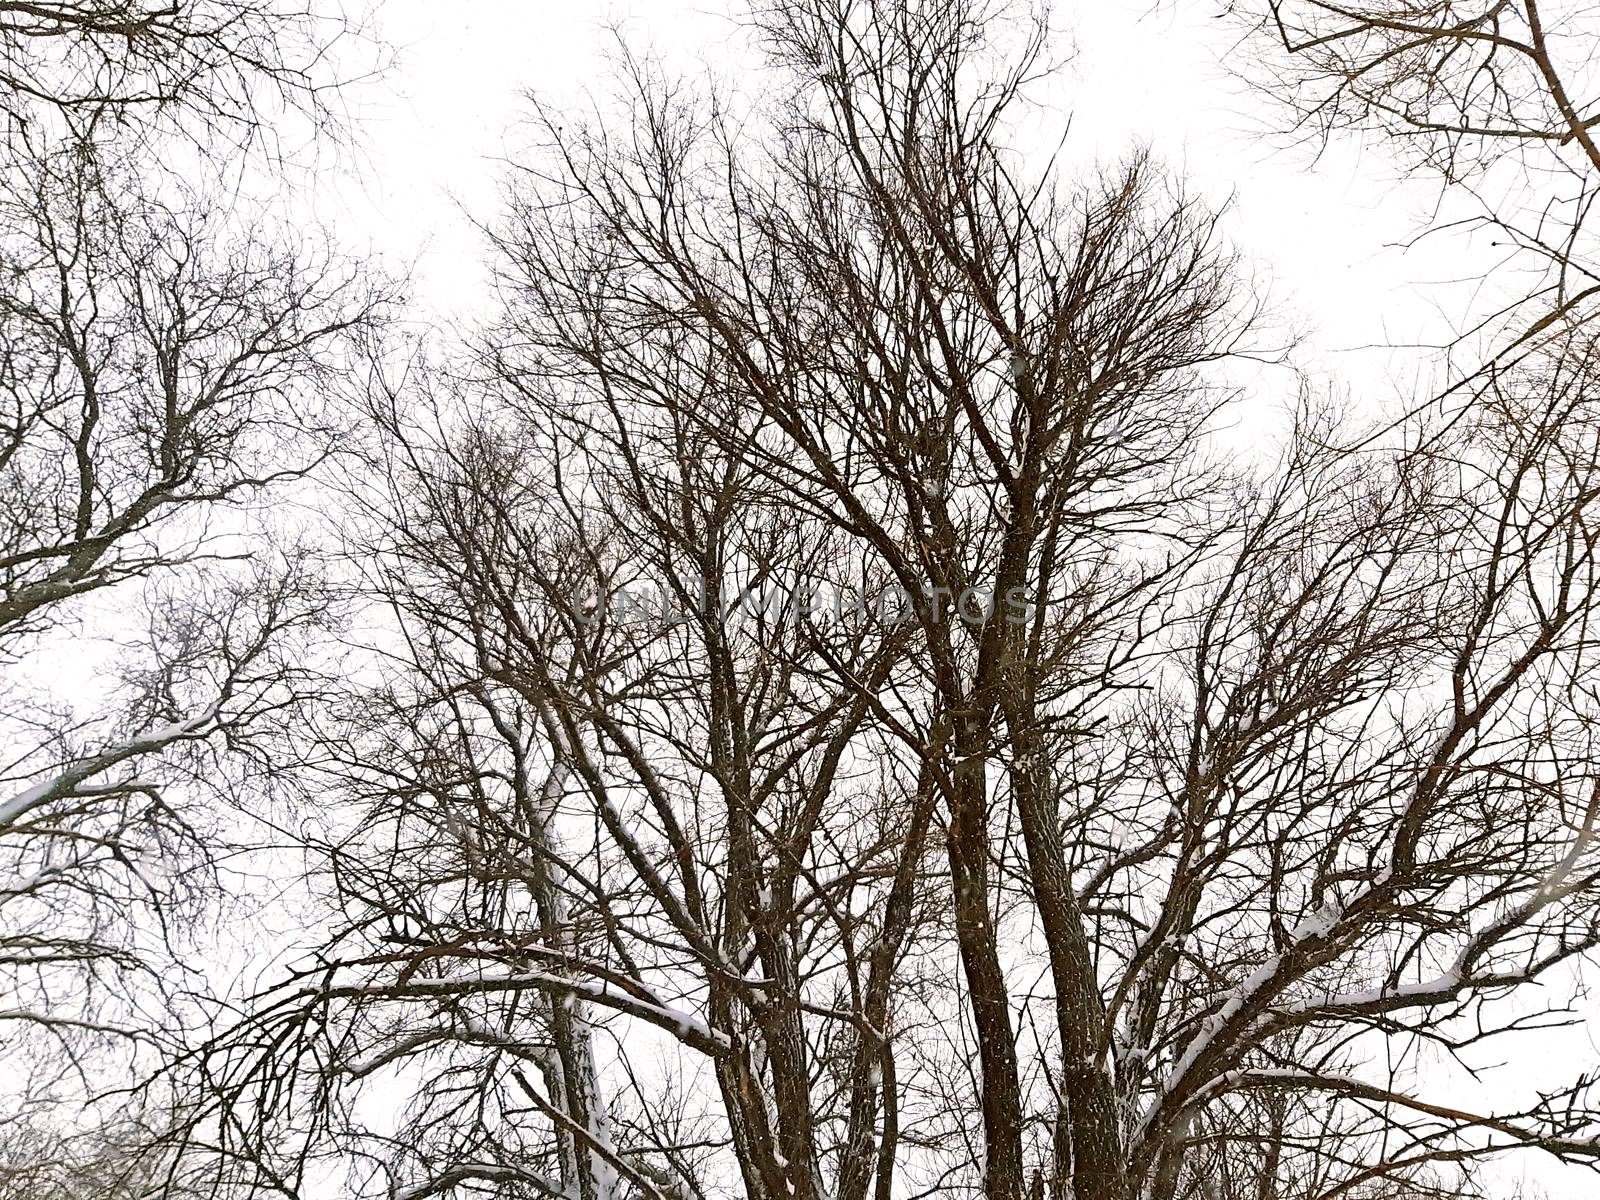 Trees without leaves in winter, snowy sky.